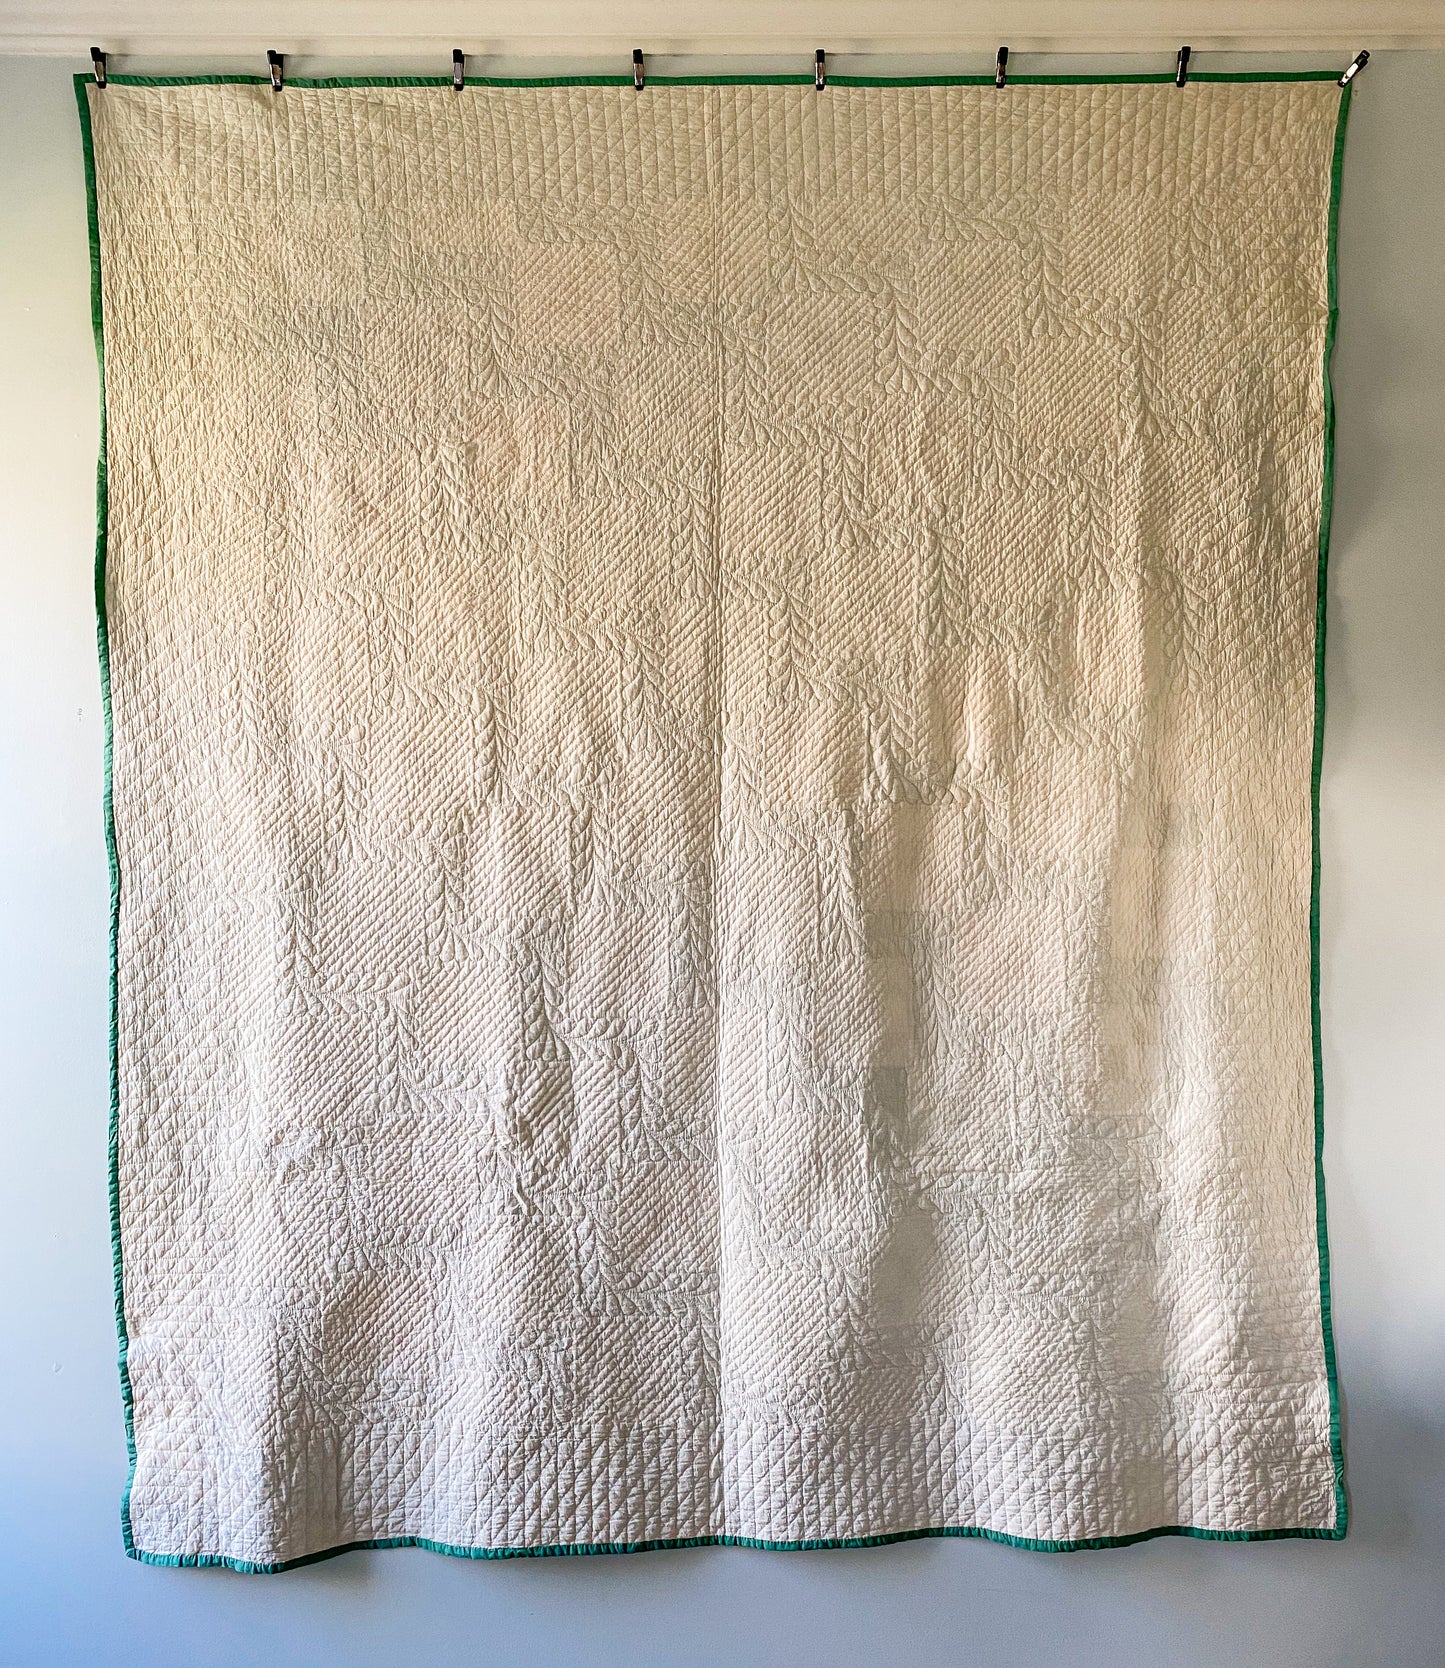 Vintage Emerald Green Shoofly Quilt, Plaid Shirting Fabrics, Feather Hand Quilting, c1930s, 82" x 67"